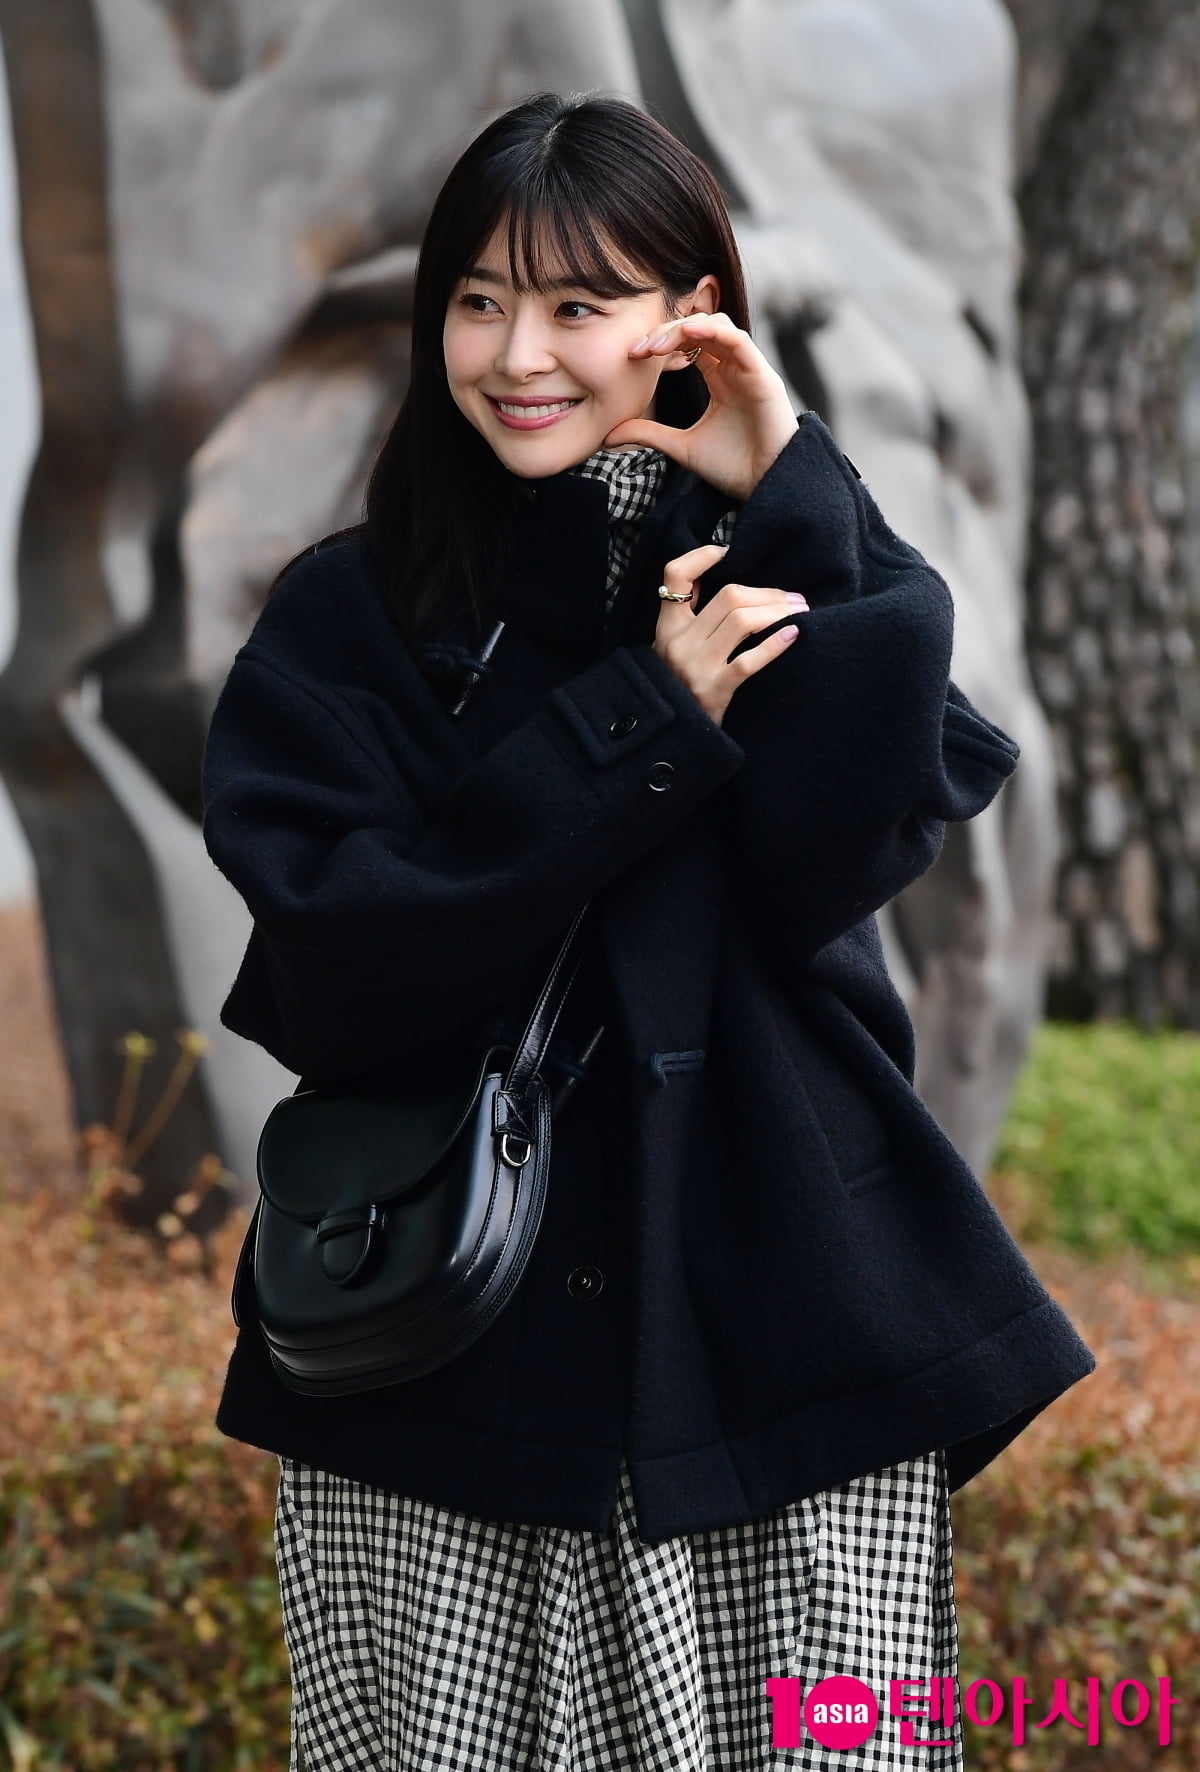 Kwon Nara, innocence + fresh spring smile... pretty today as well 